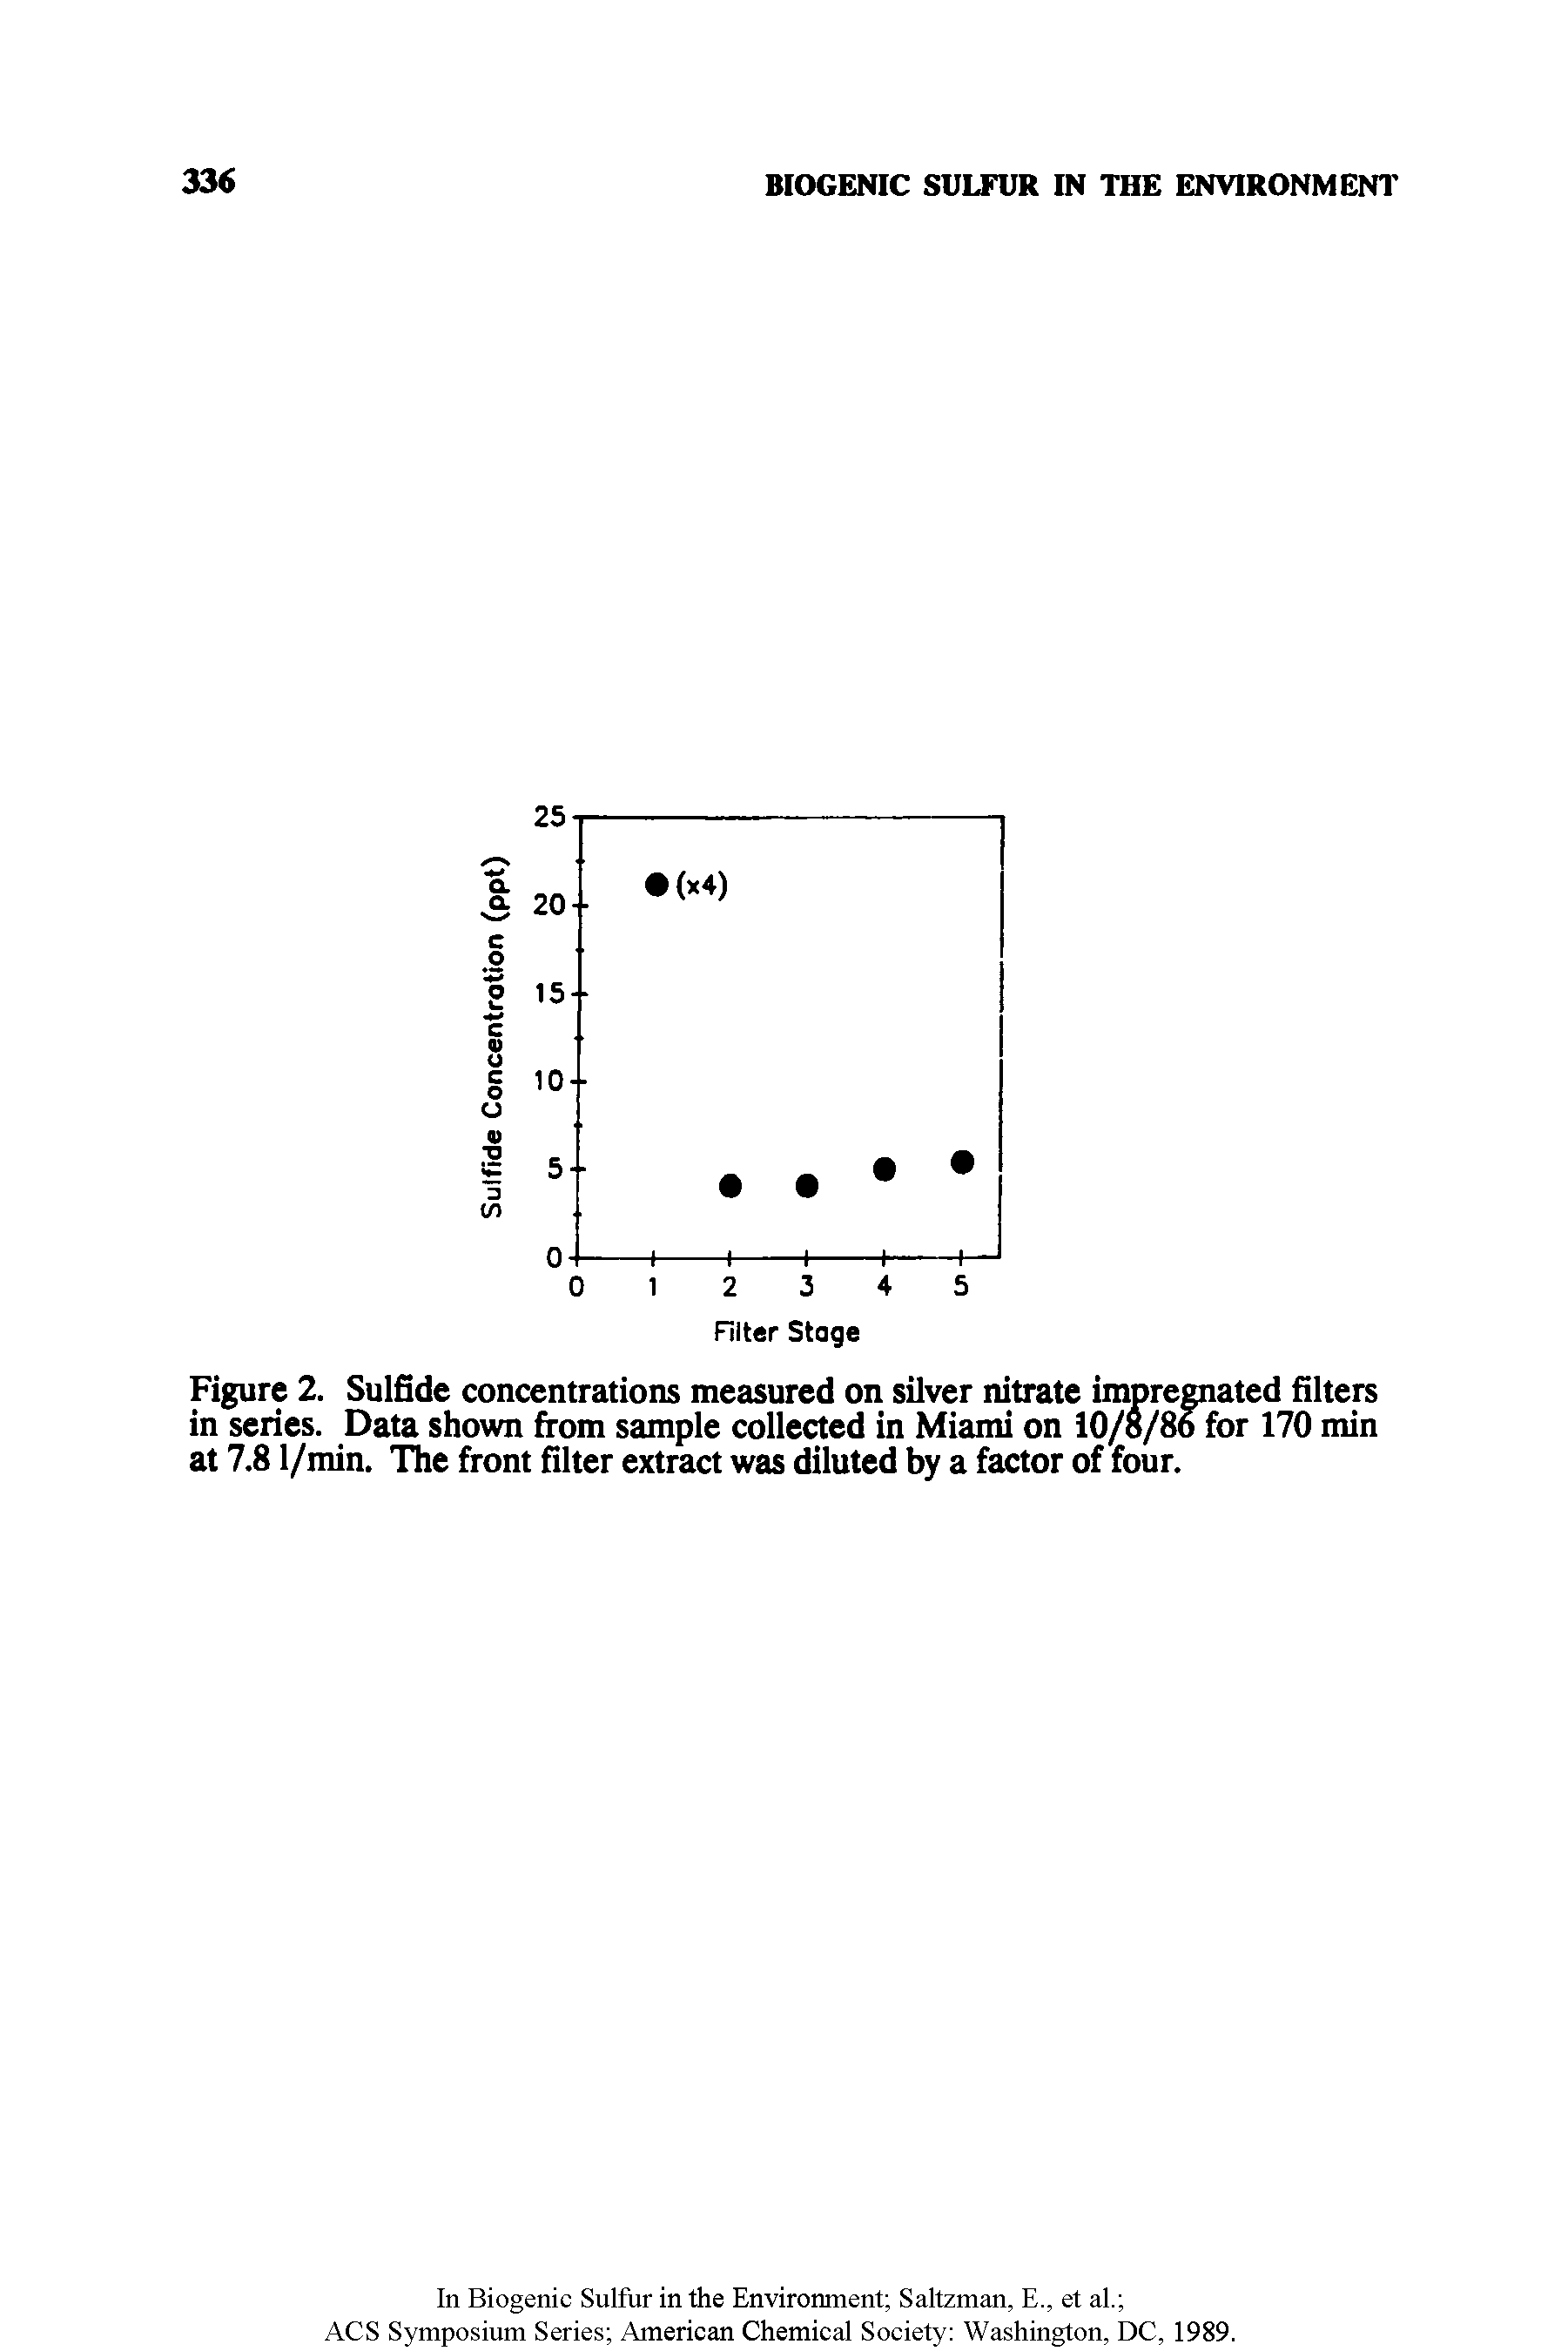 Figure 2. Sulfide concentrations measured on silver nitrate impregnated filters in series. Data shown from sample collected in Miami on 10/8/86 for 170 min at 7.81/min. The front filter extract was diluted by a factor of four.